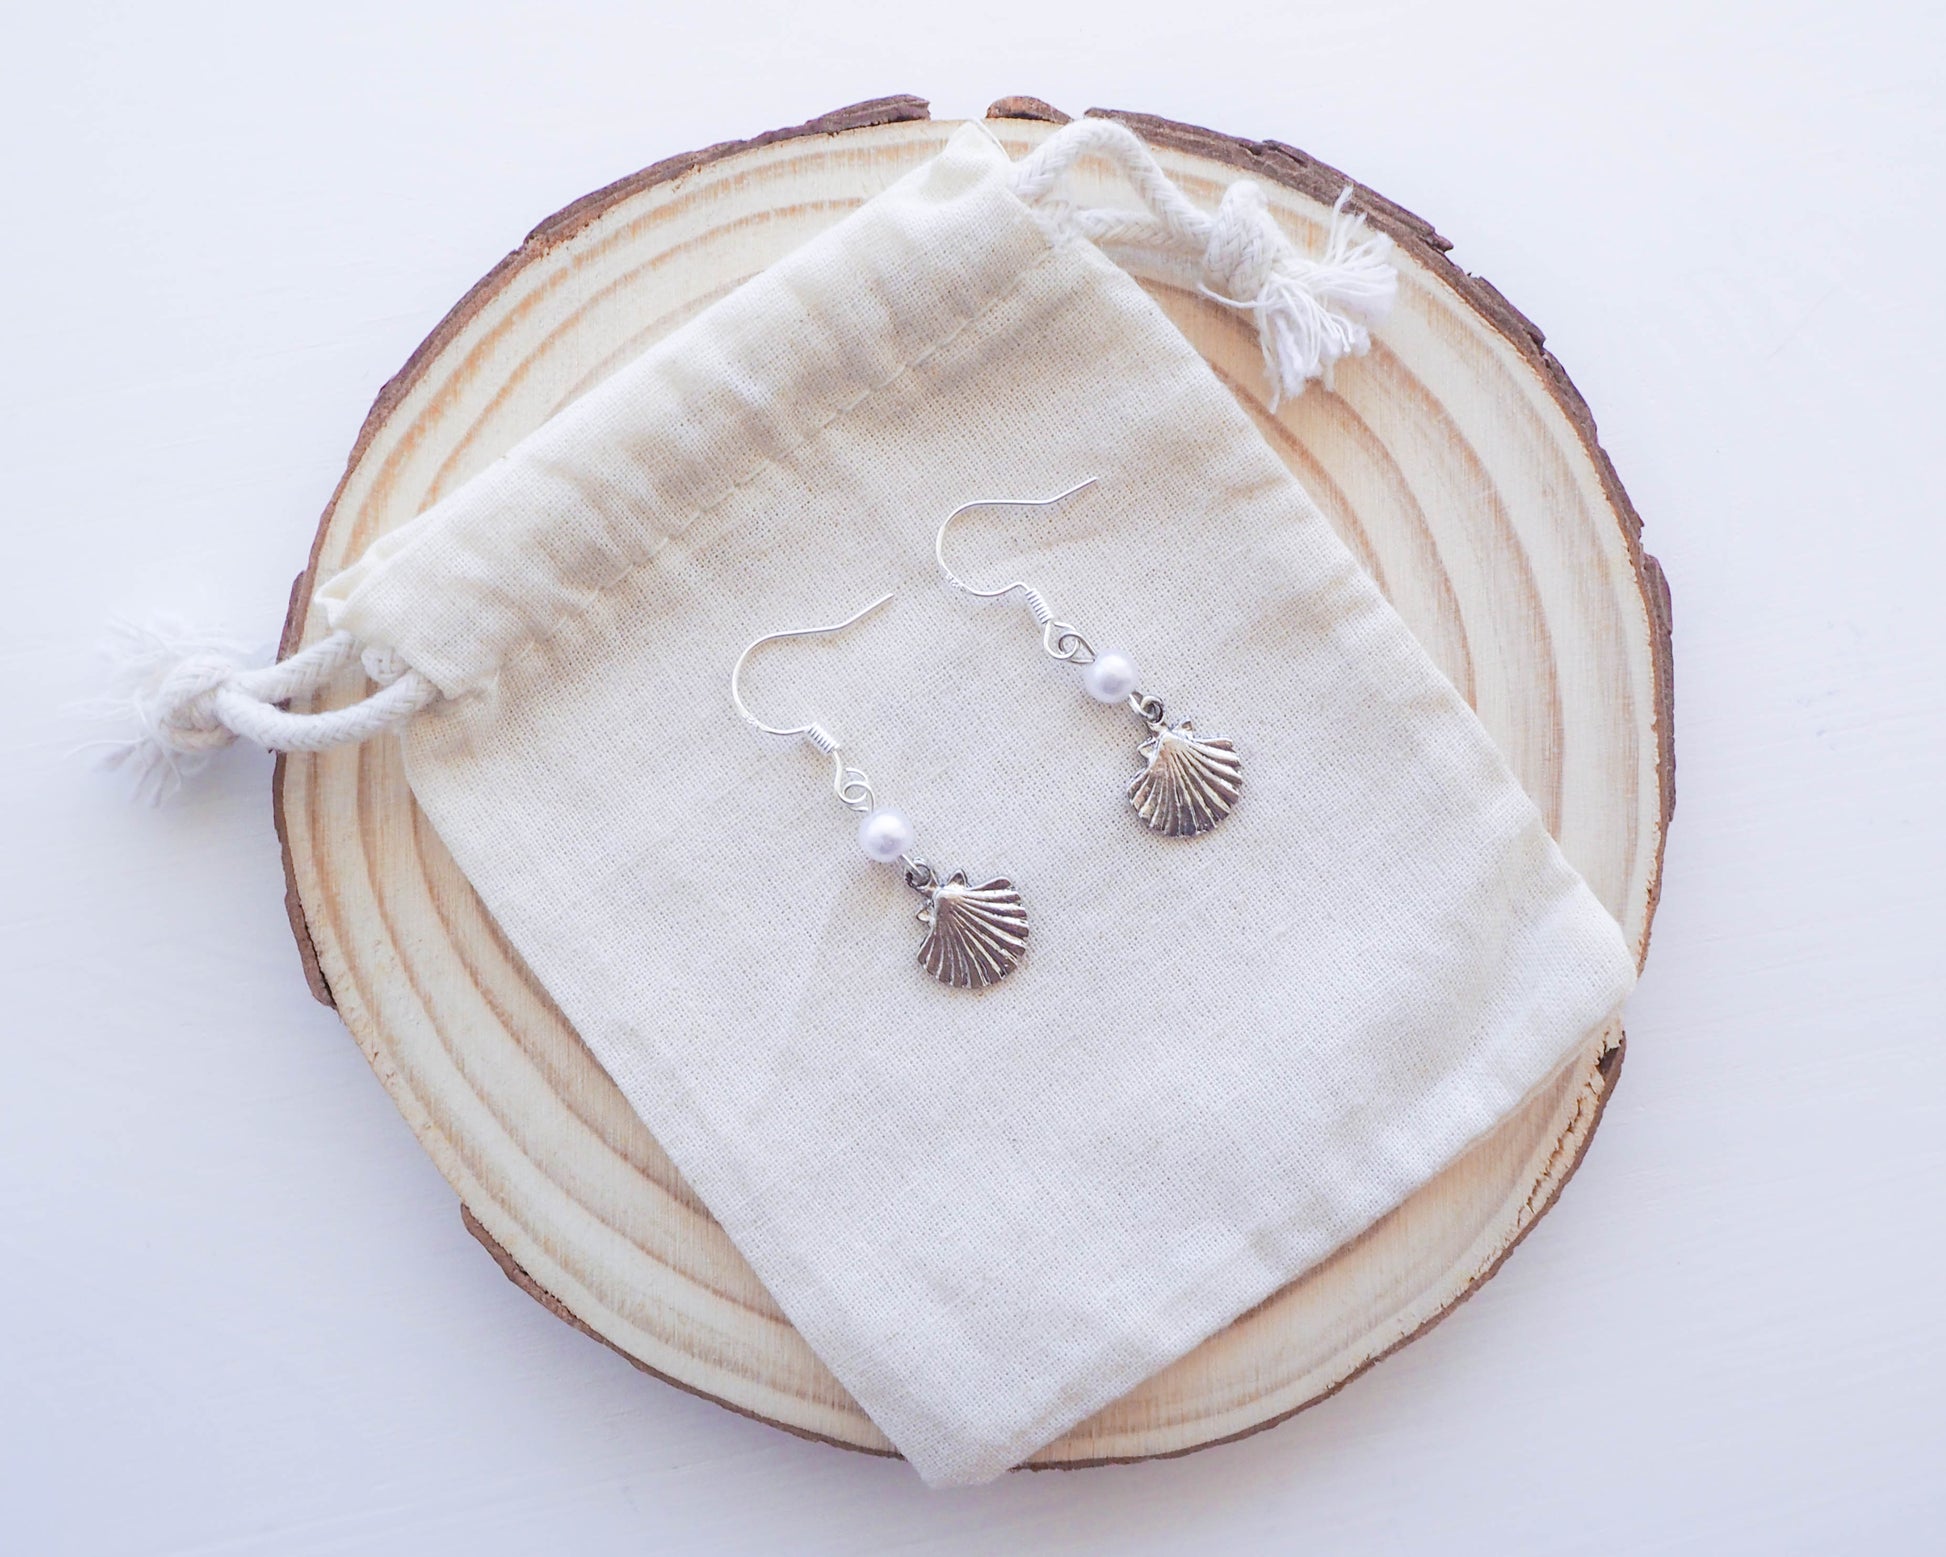 925 Silver Earrings - Coastal Charm with Pearl Beads and Seashell"